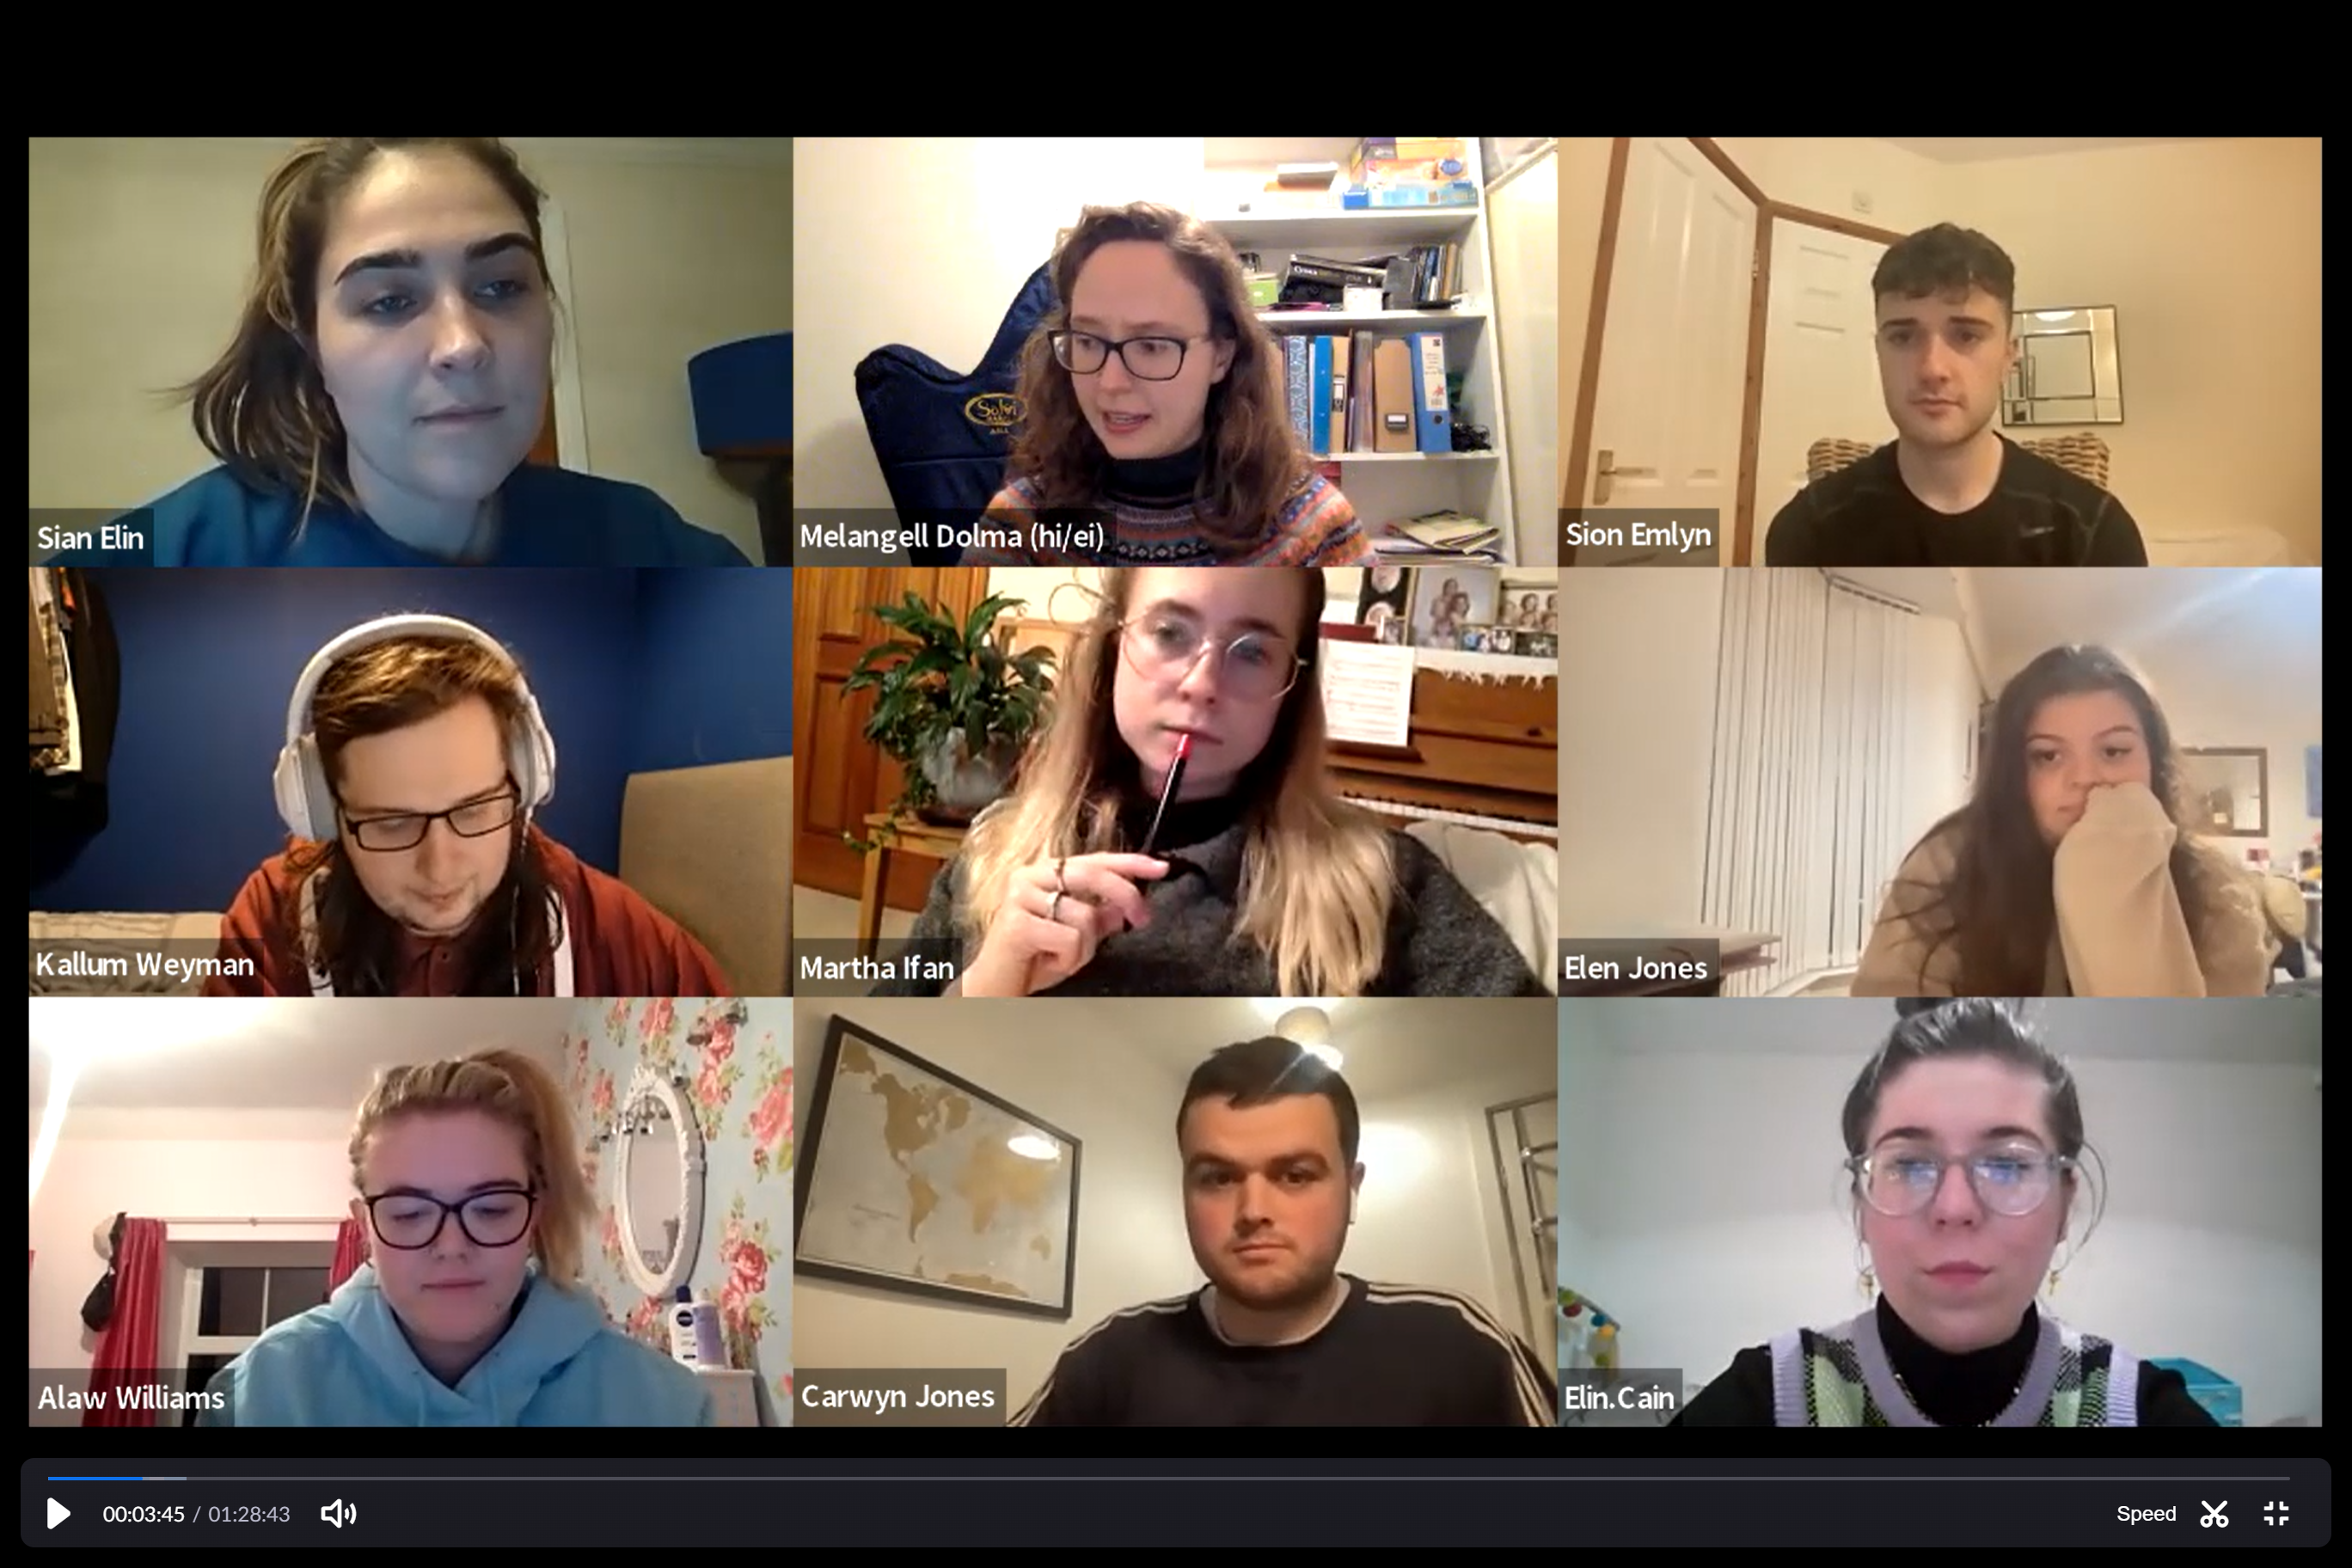 Screenshot of a Zoom call with 9 individuals. All cameras are on and the screen is split into three rows across and downwards with 9 rectangles containing each person's video feed